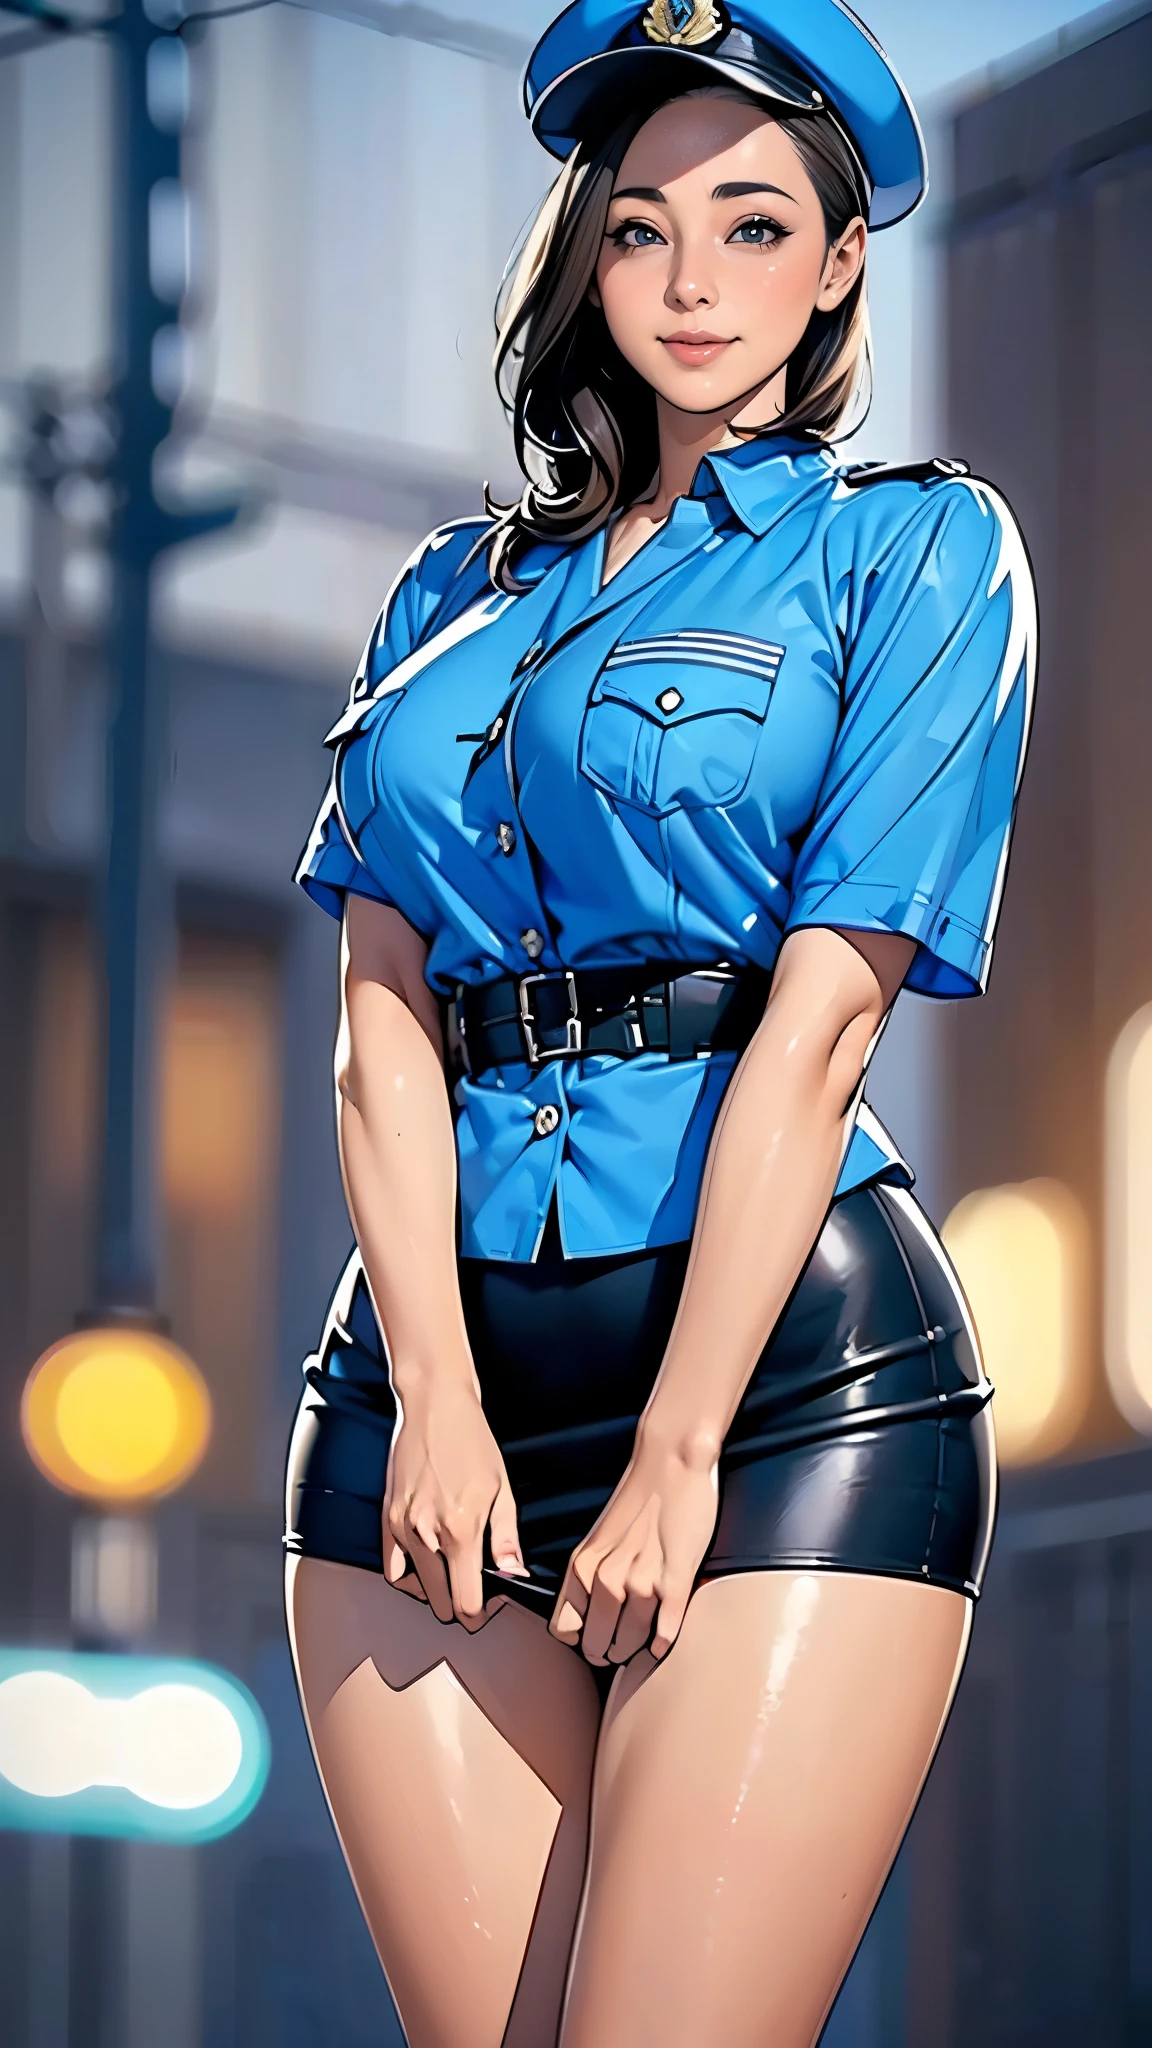 (masterpiece:1.2, highest quality), (Realistic, photoRealistic:1.4),Beautiful illustrations,(Natural Side Lighting, Cinema Lighting),1 female,Japanese,Mature Woman,Policewoman on patrol,48 years old,Perfect Face, Symmetrical face, Shiny skin,Random Hairstyles,Big eyes,(smile),(whole body),BREAK((Police Officer Shirt)),((Tight mini skirt)),(Police hat),(The background is a street corner:1.5),(((Background Blur:1.5))),((police uniform)),(From below:1.3)